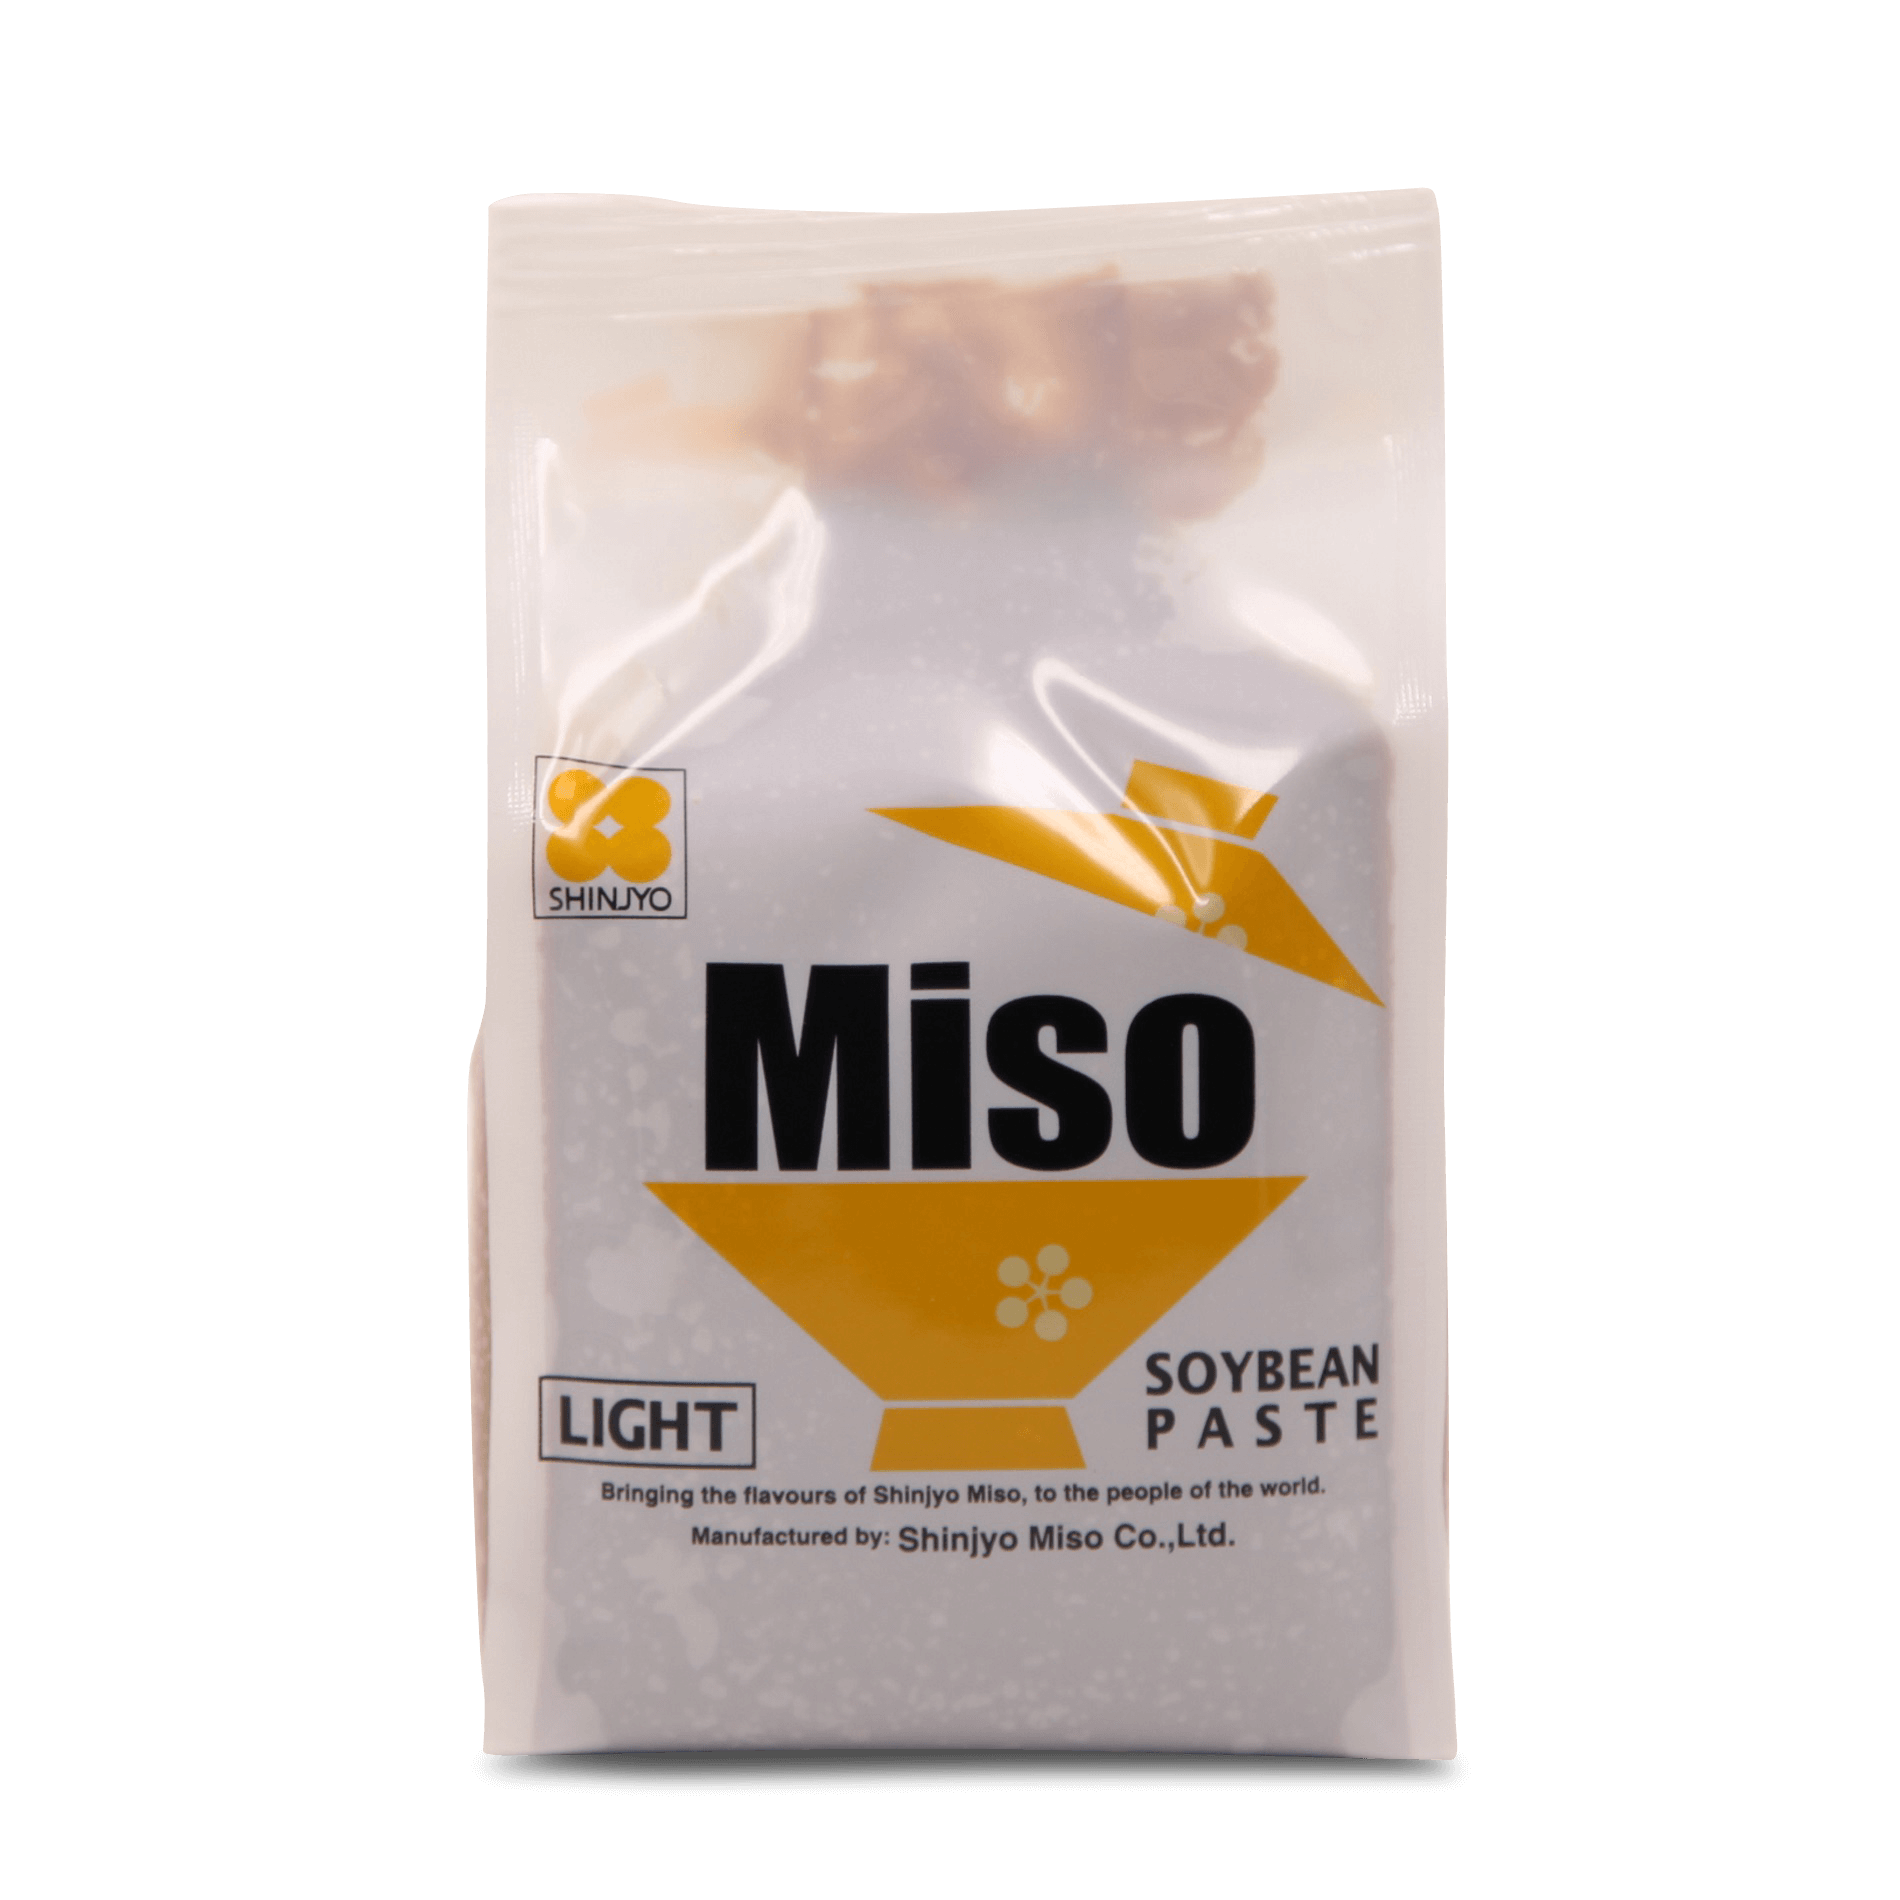 Miso Suppenpaste 'hell'